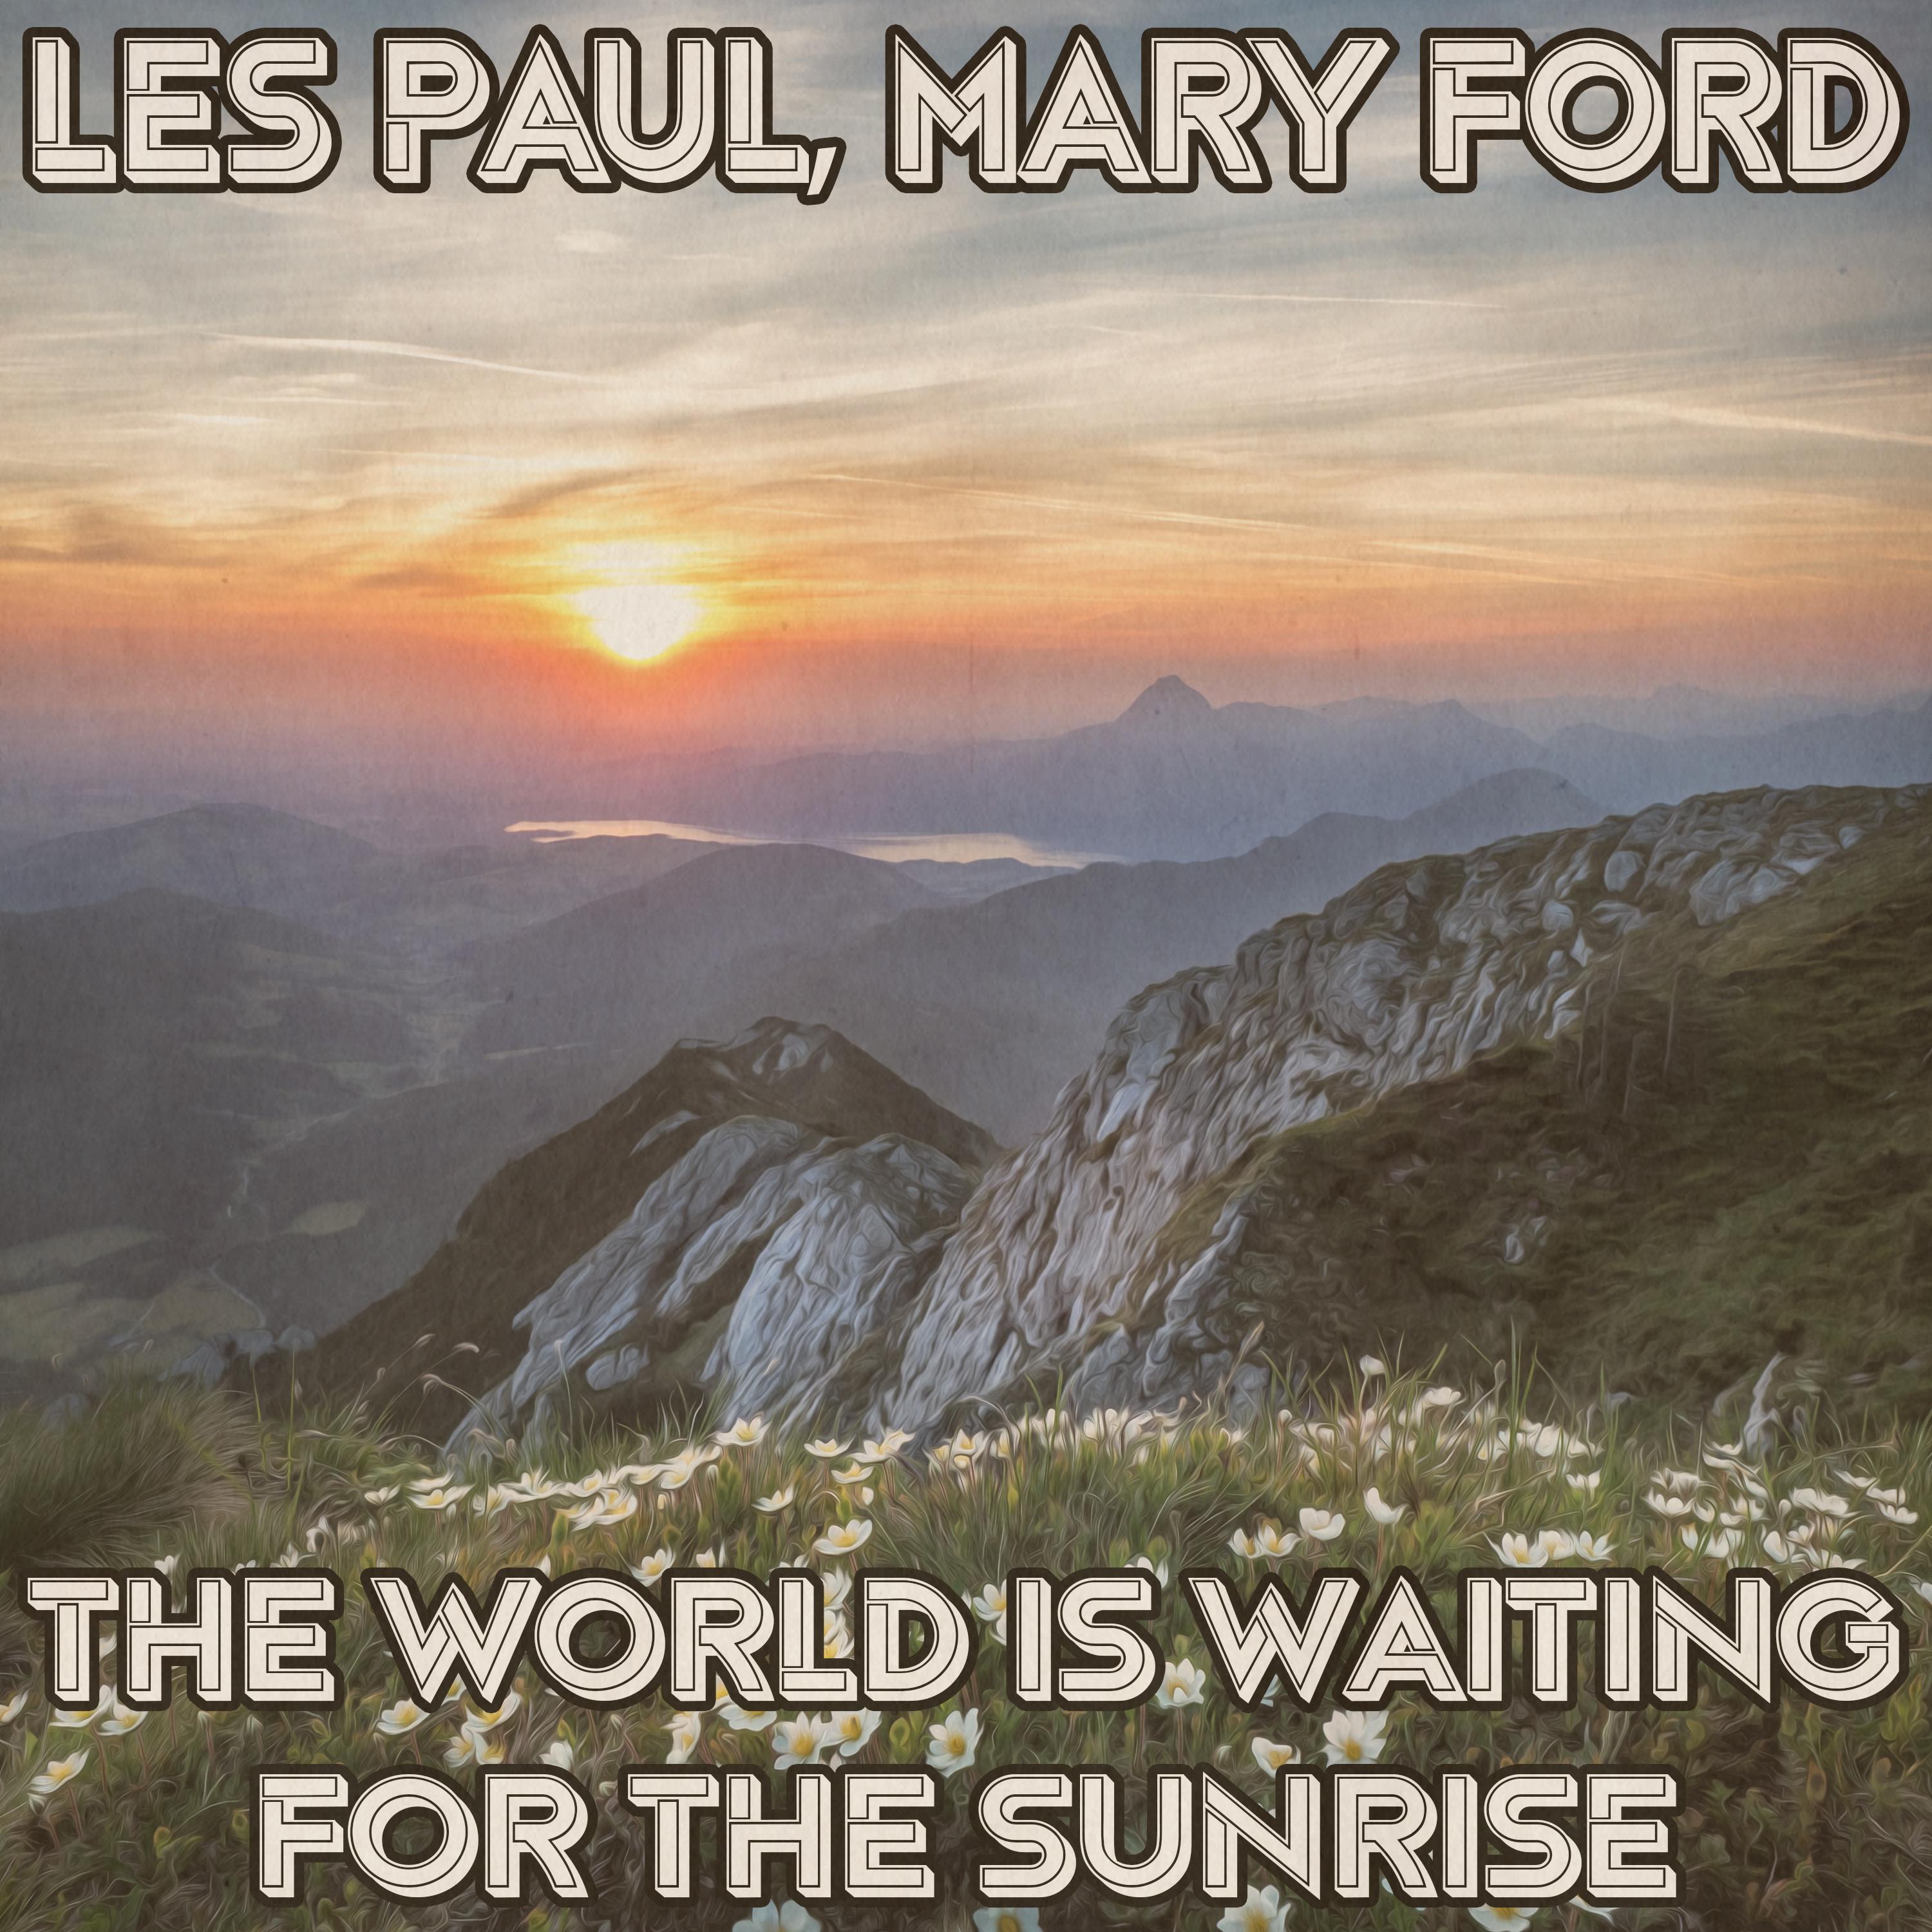 Les Paul - In the Good Old Summertime (Remastered 2014)